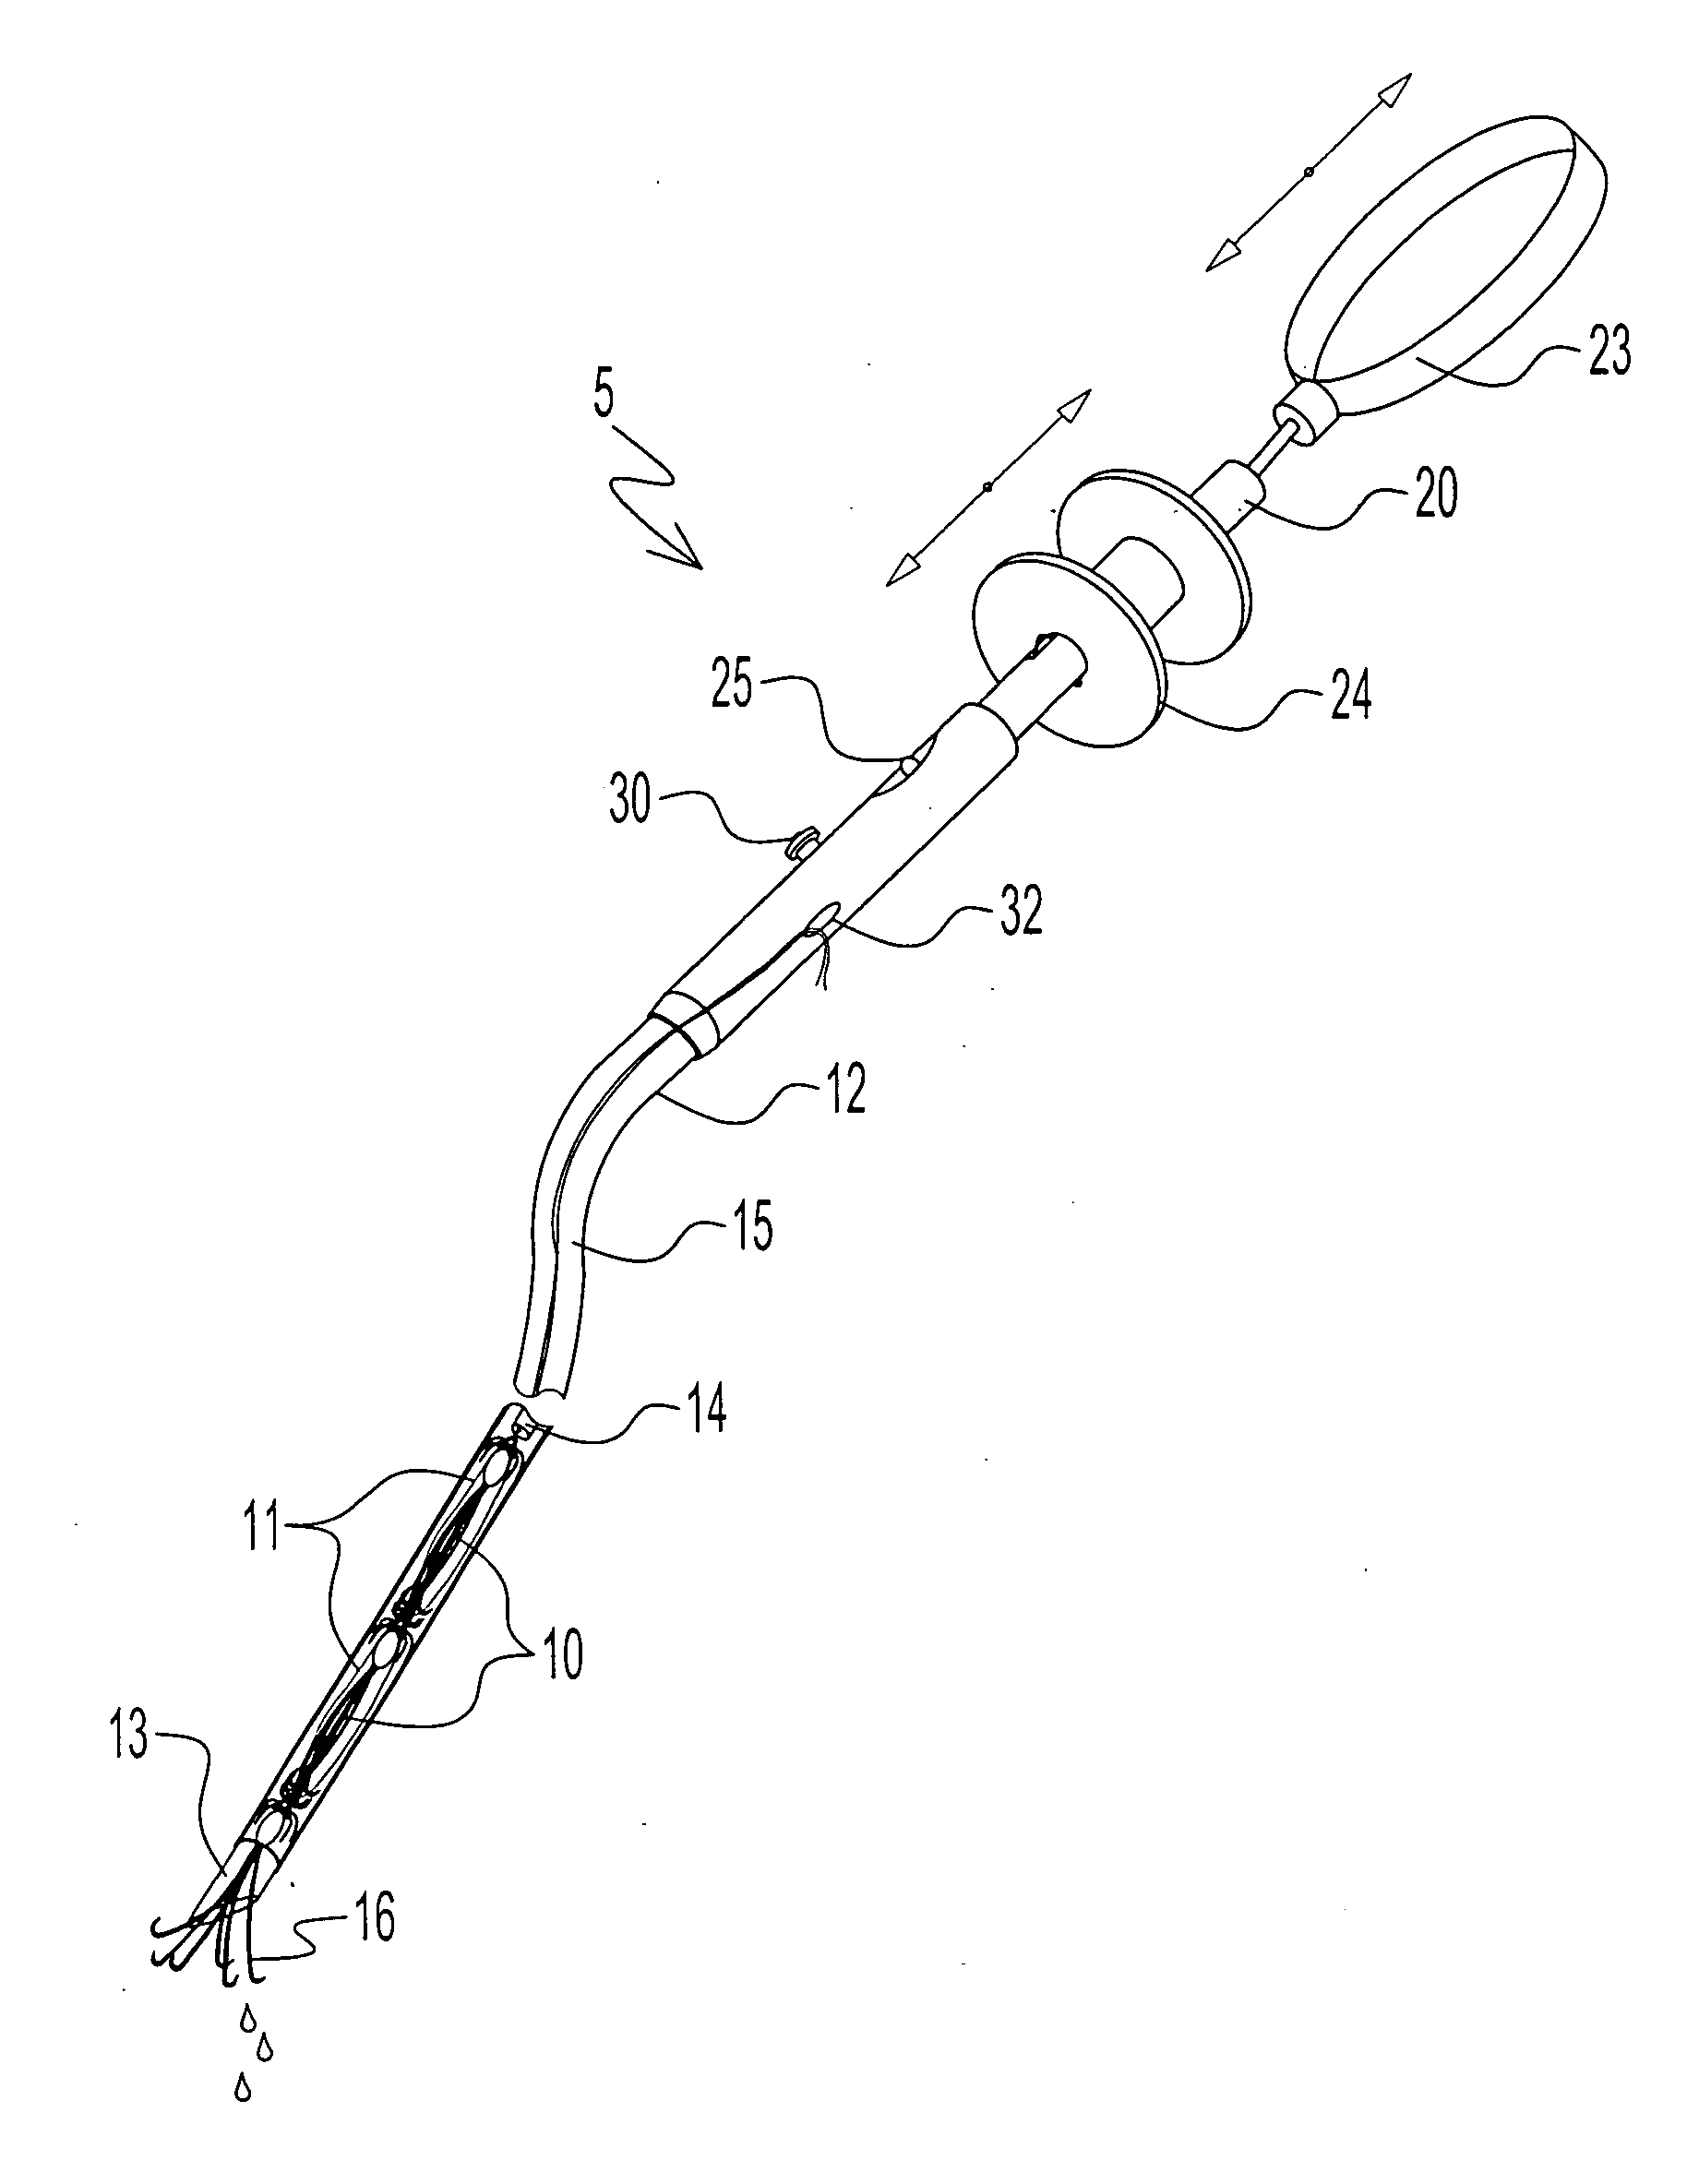 Endoscopic anchoring device and associated method